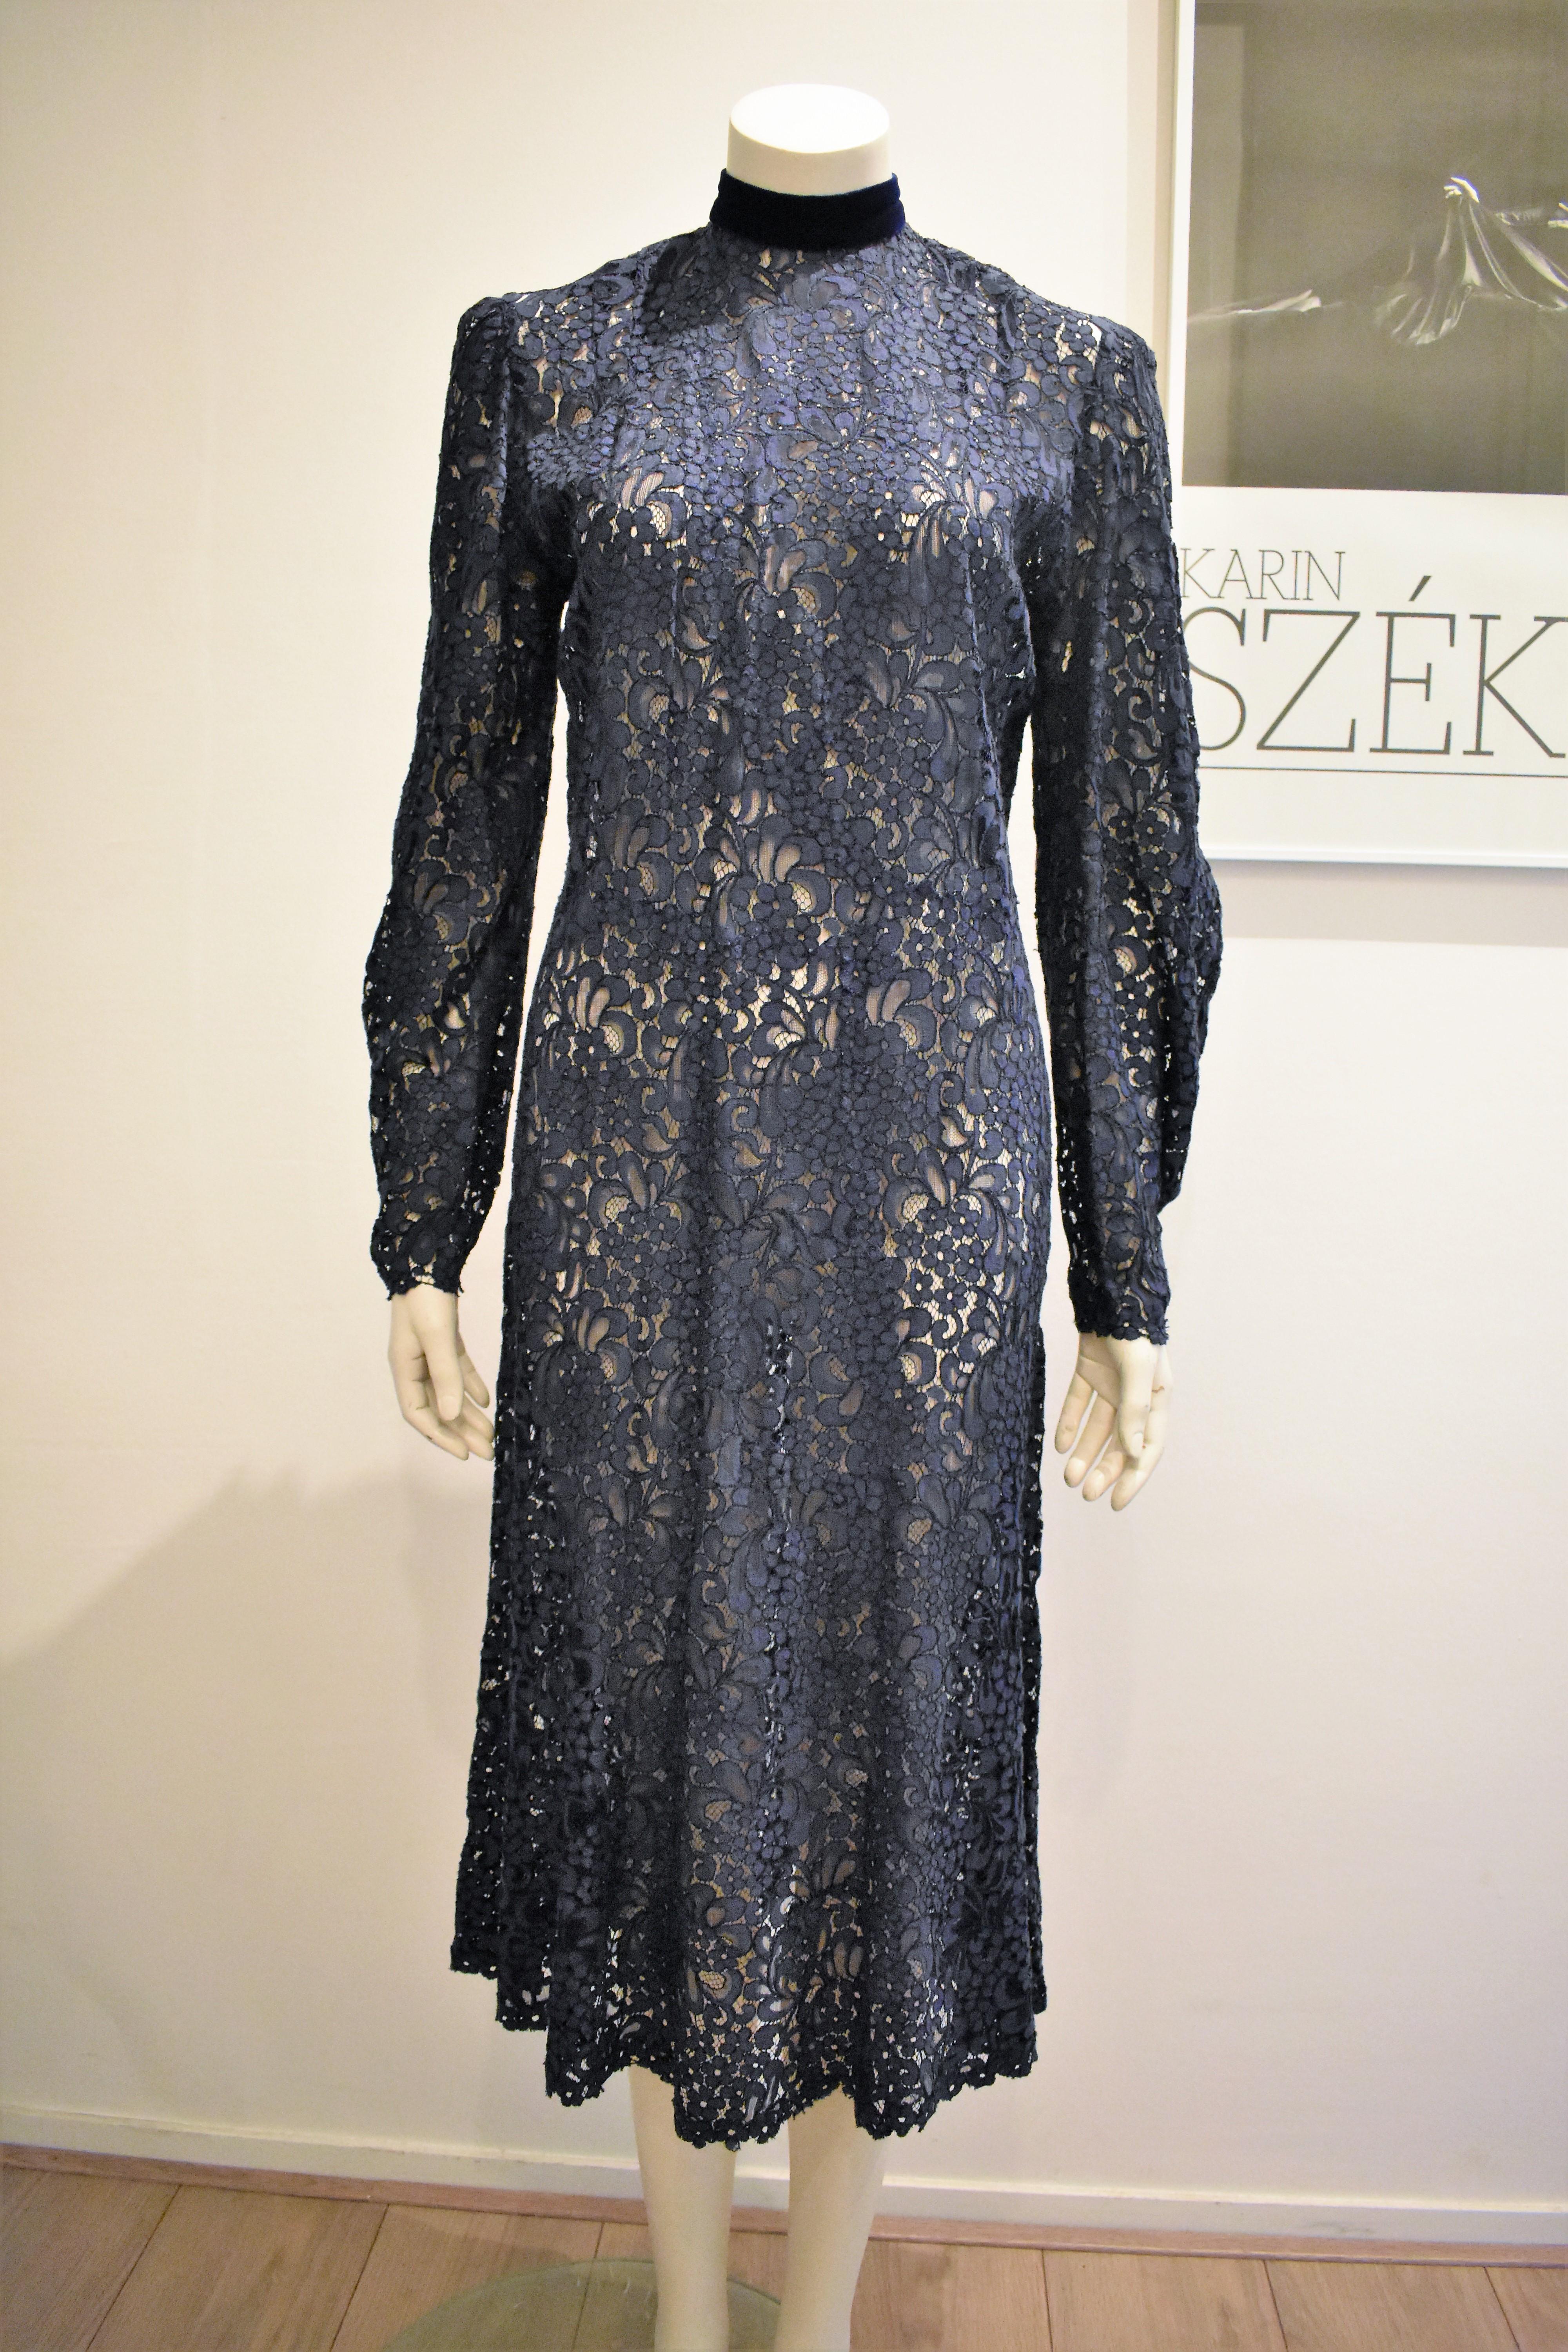 A beautiful dress completely handmade from dark blue lace. 
Before shipping, the dress will be sent to a specialist for a complementary dry cleaning, so it will be perfect and ready to wear upon arrival.